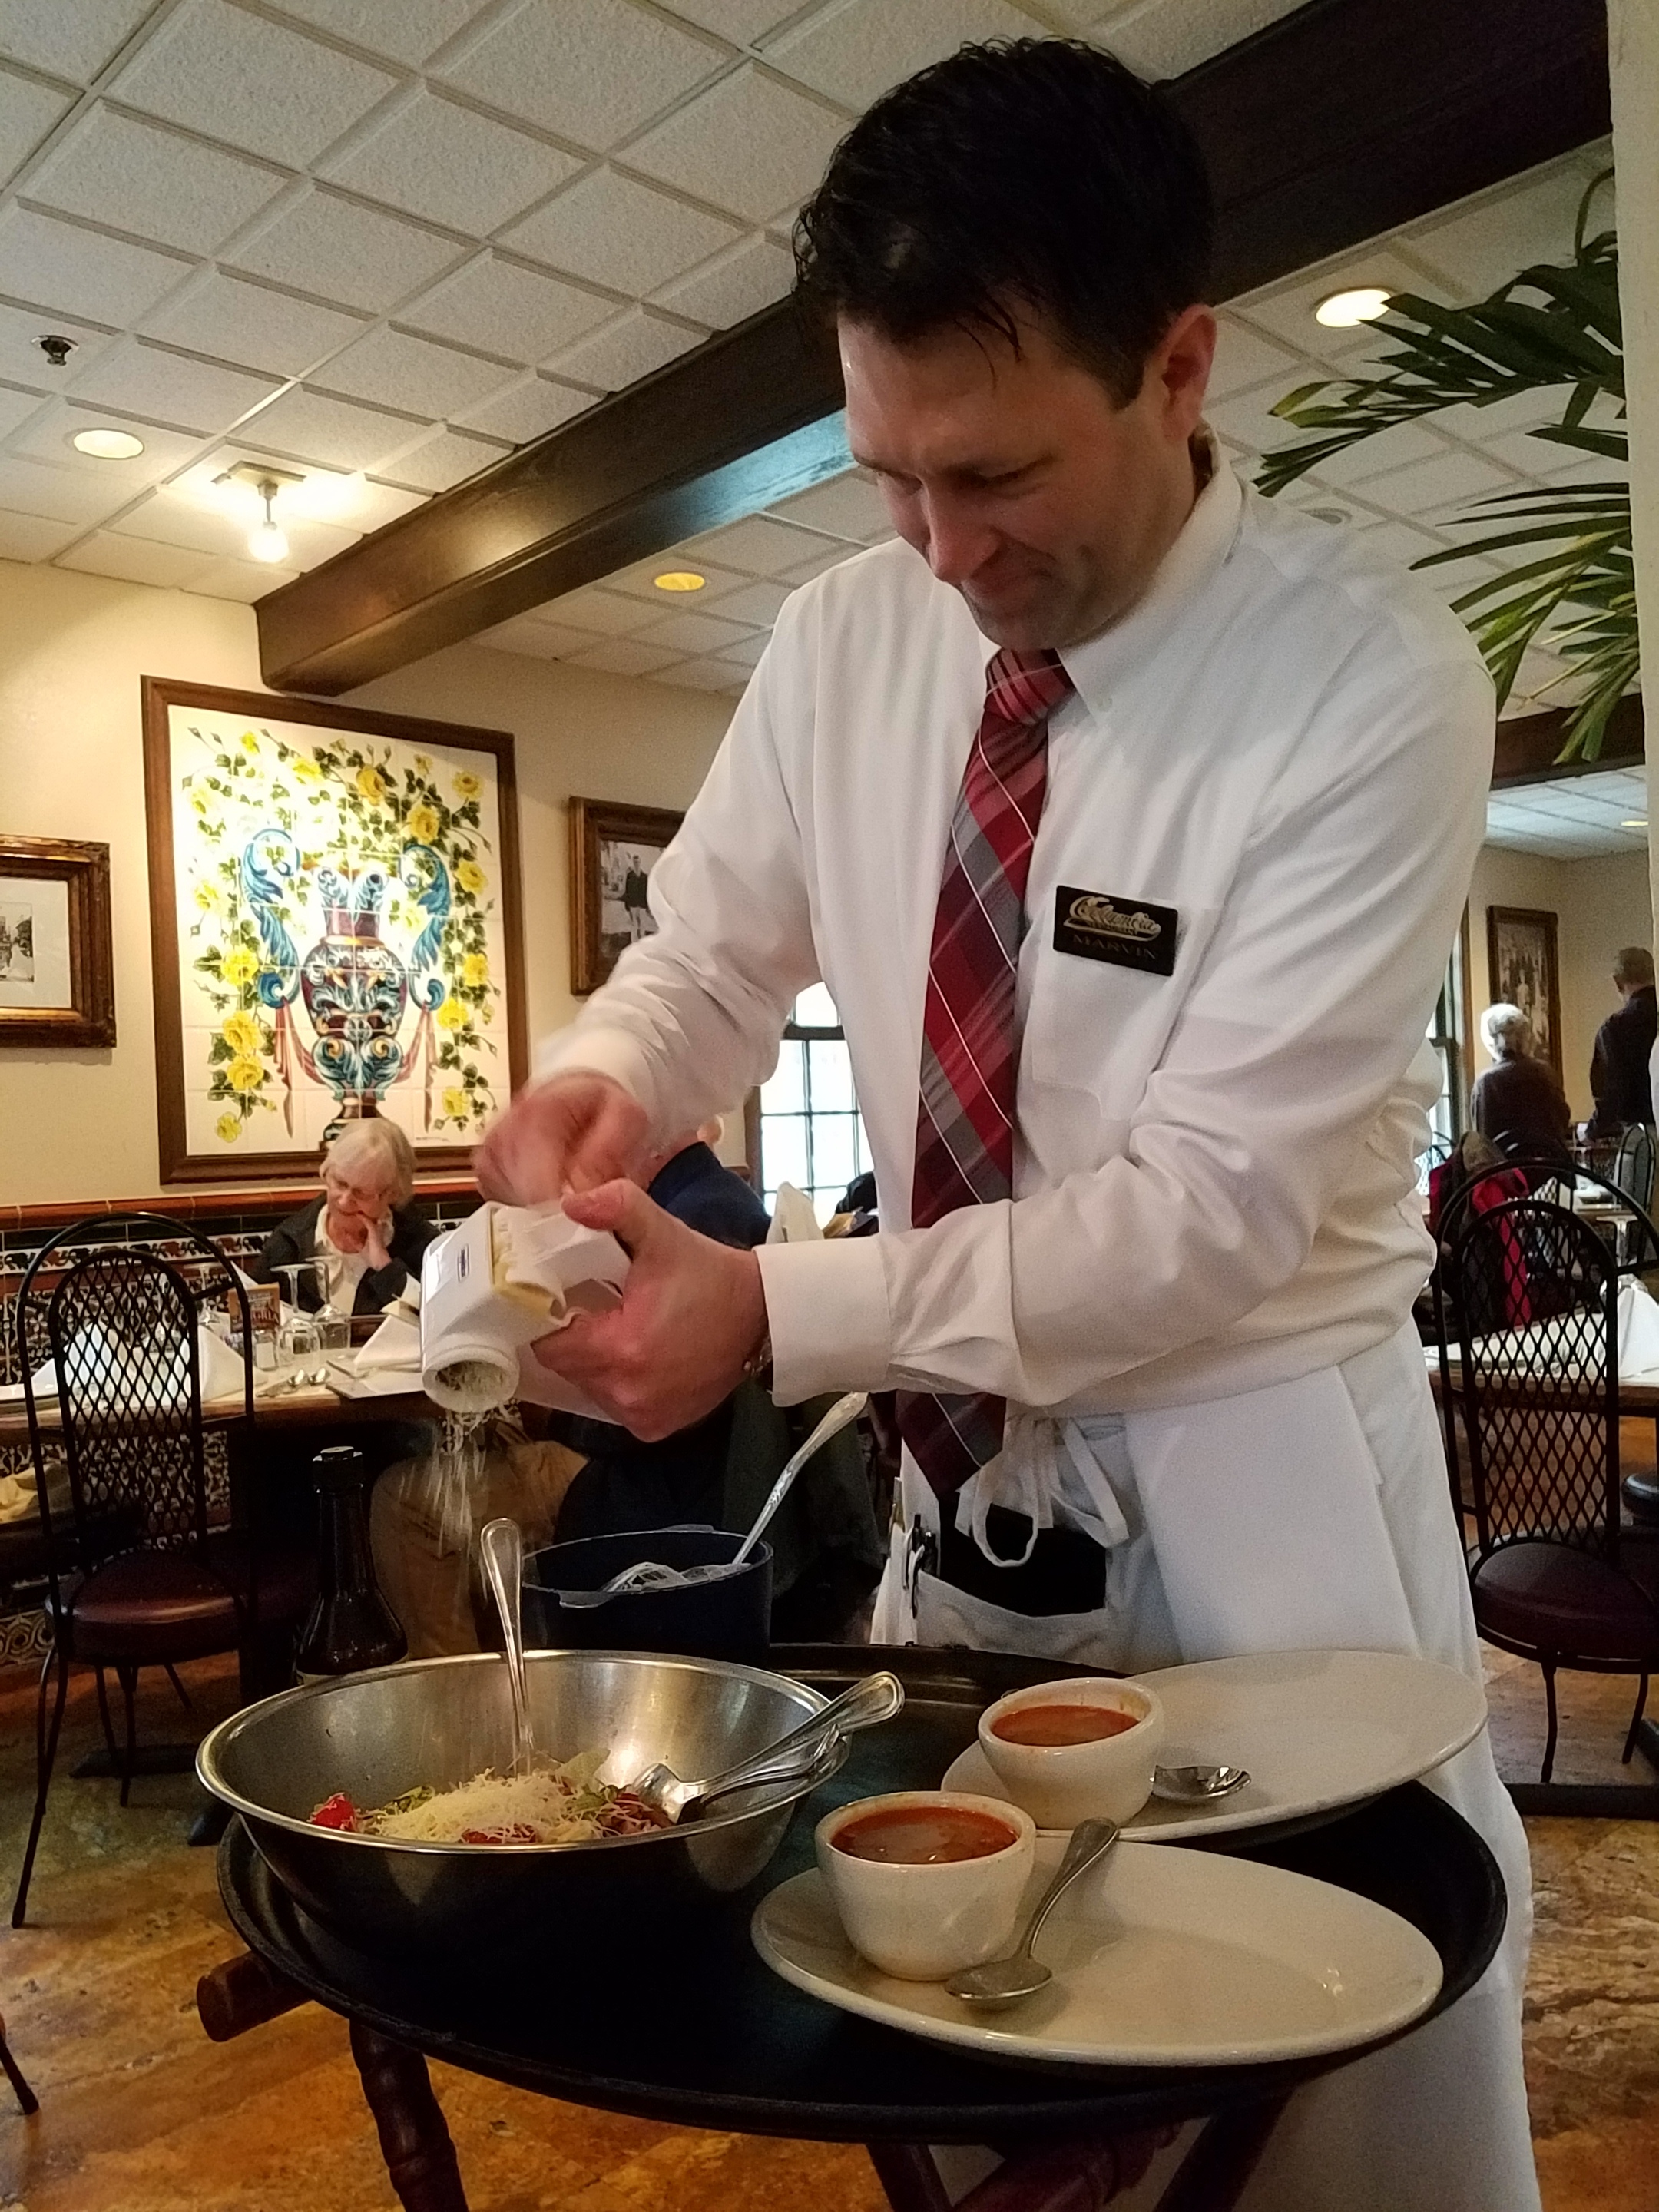 Tableside Service at Columbia Restaurant